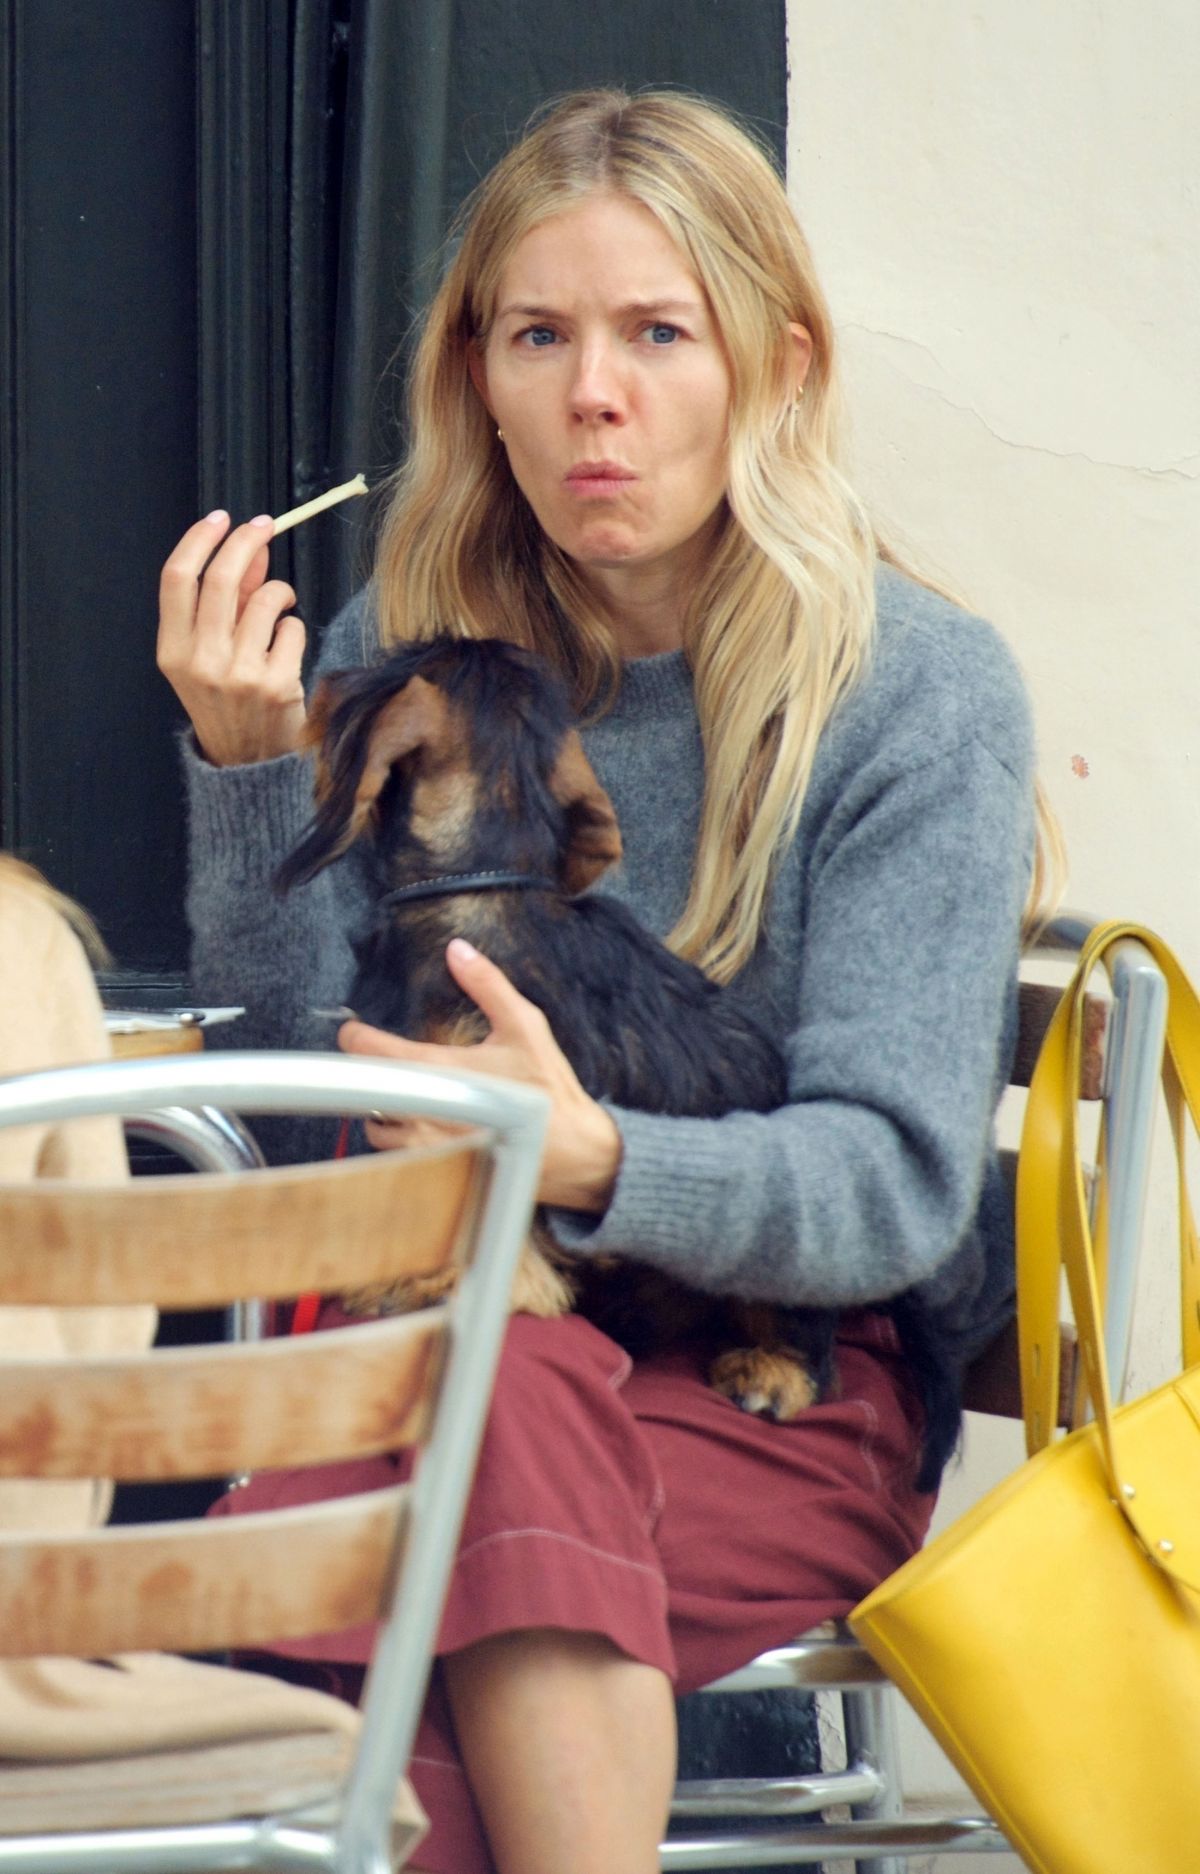 sienna-miller-out-with-her-dog-in-london-09-08-2020-3.jpg